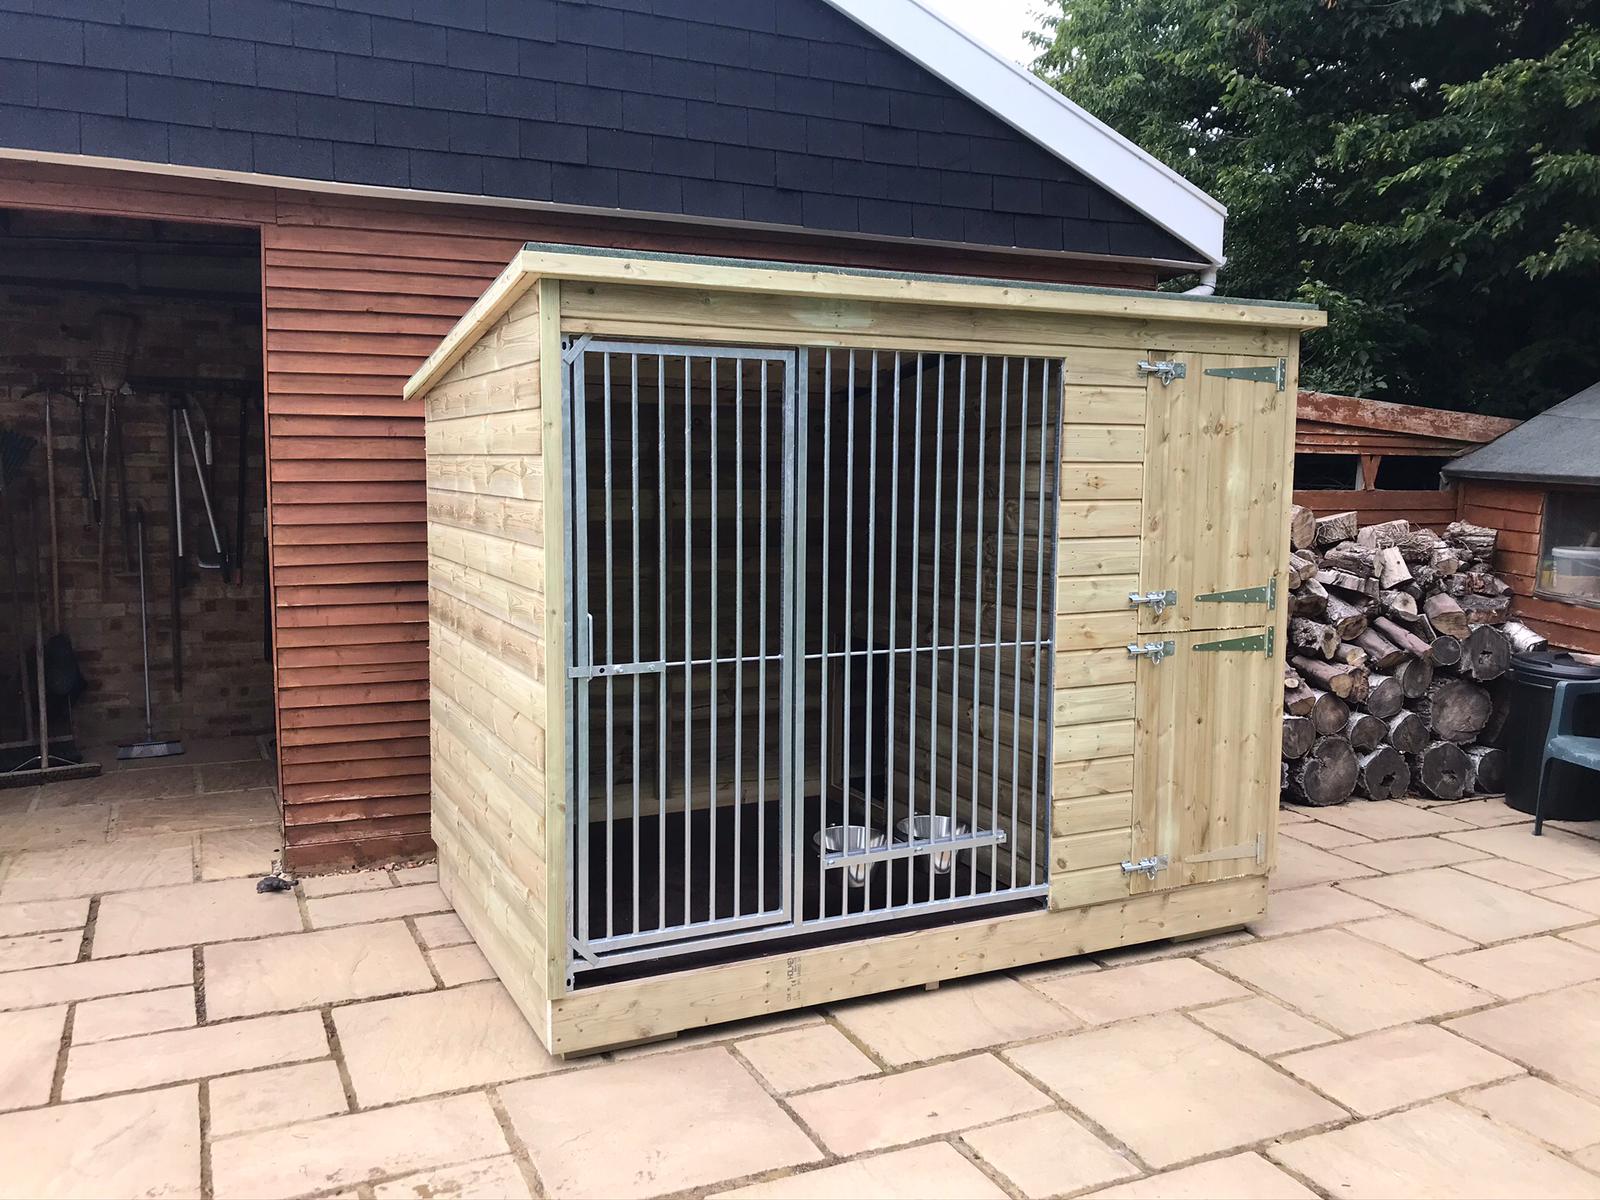 Chesterfield Wooden Dog Kennel And Run 10'6ft (wide) x 4ft (depth) x 5'11ft (high)